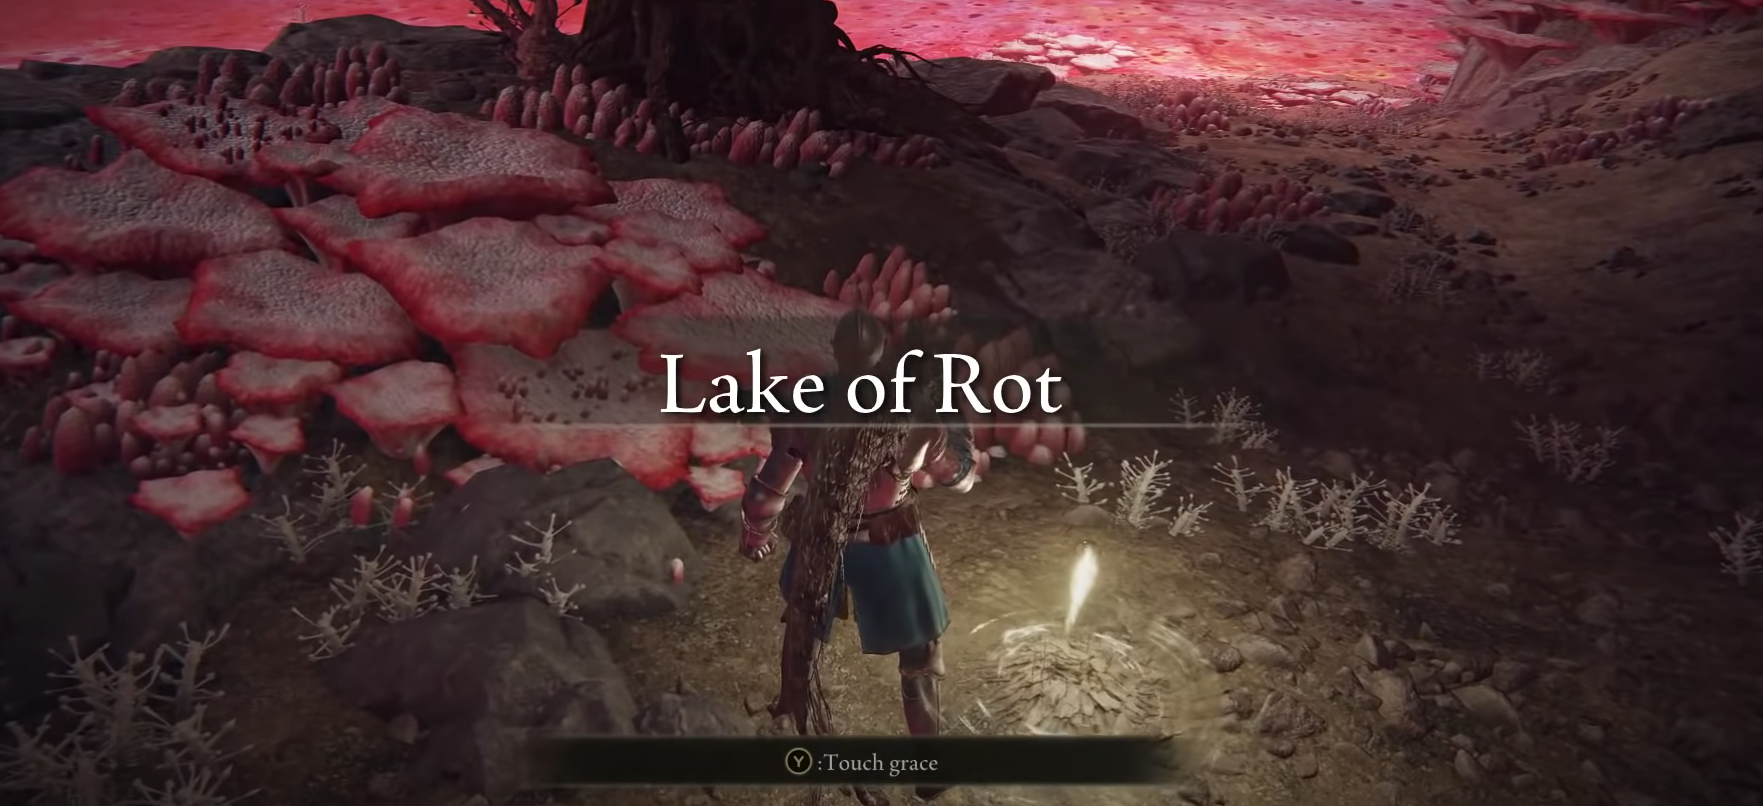 Arriving at Lake of Rot